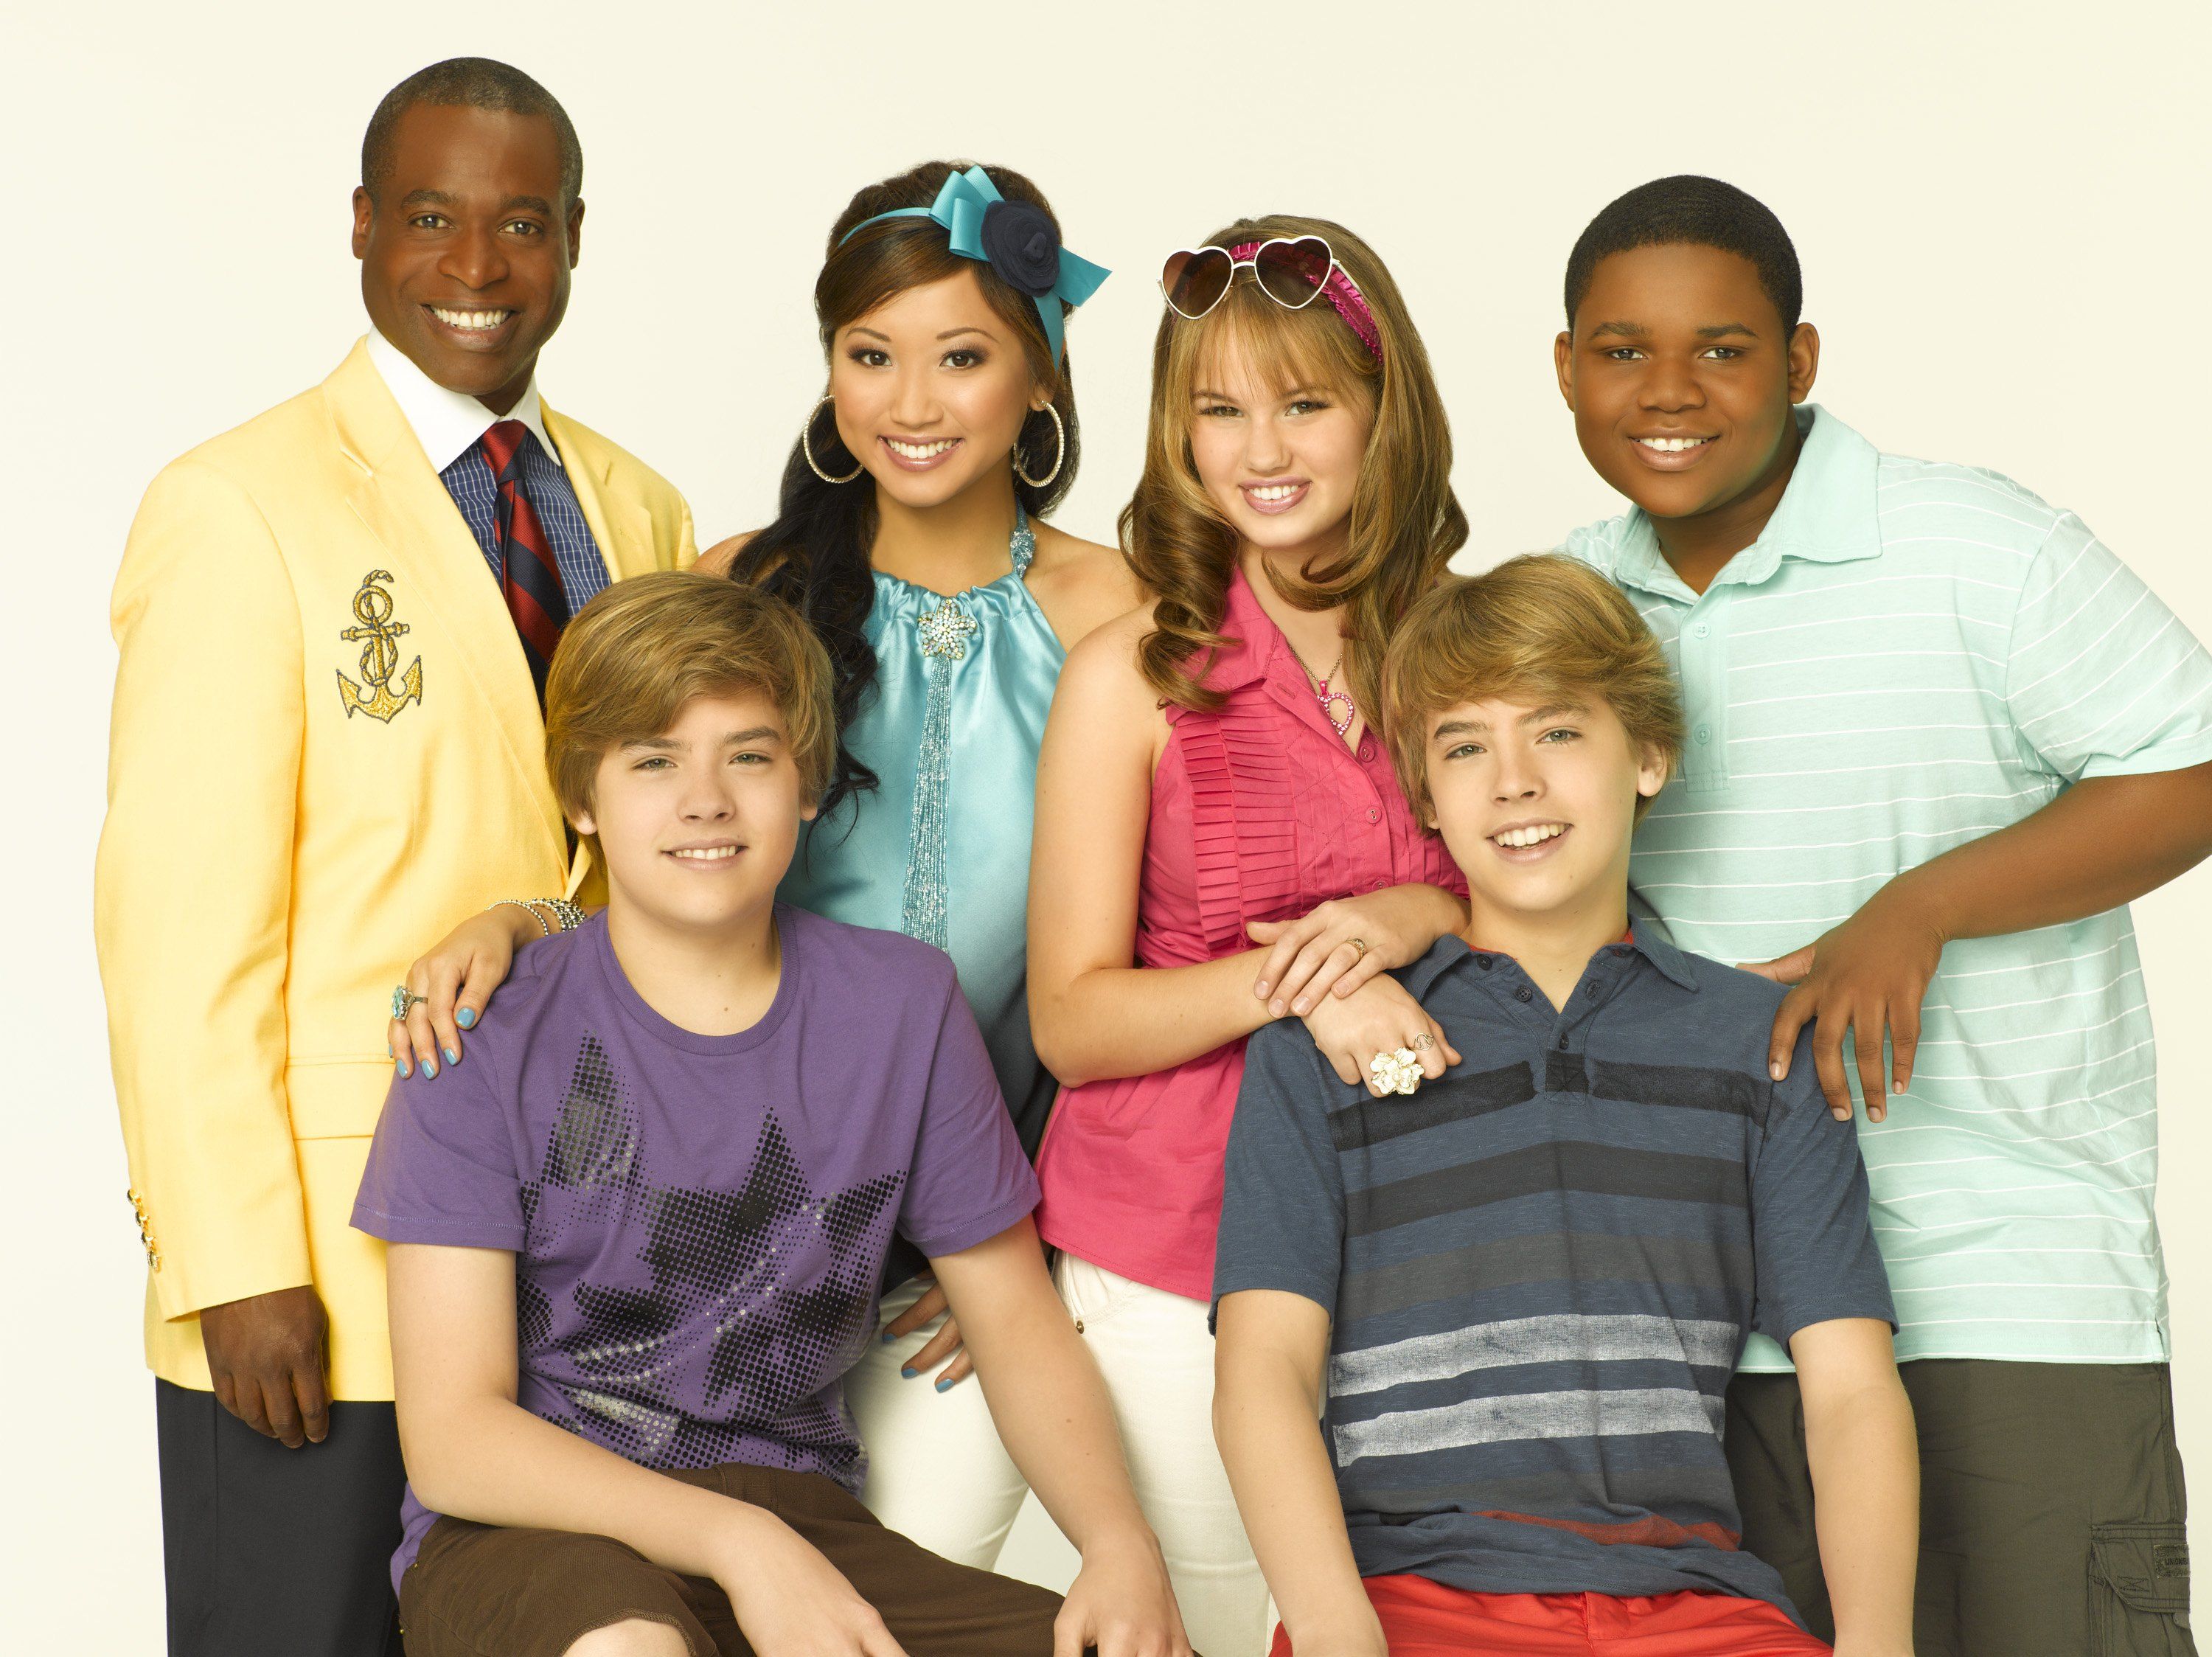 The Suite Life on Deck Season 3 - episodes streaming online